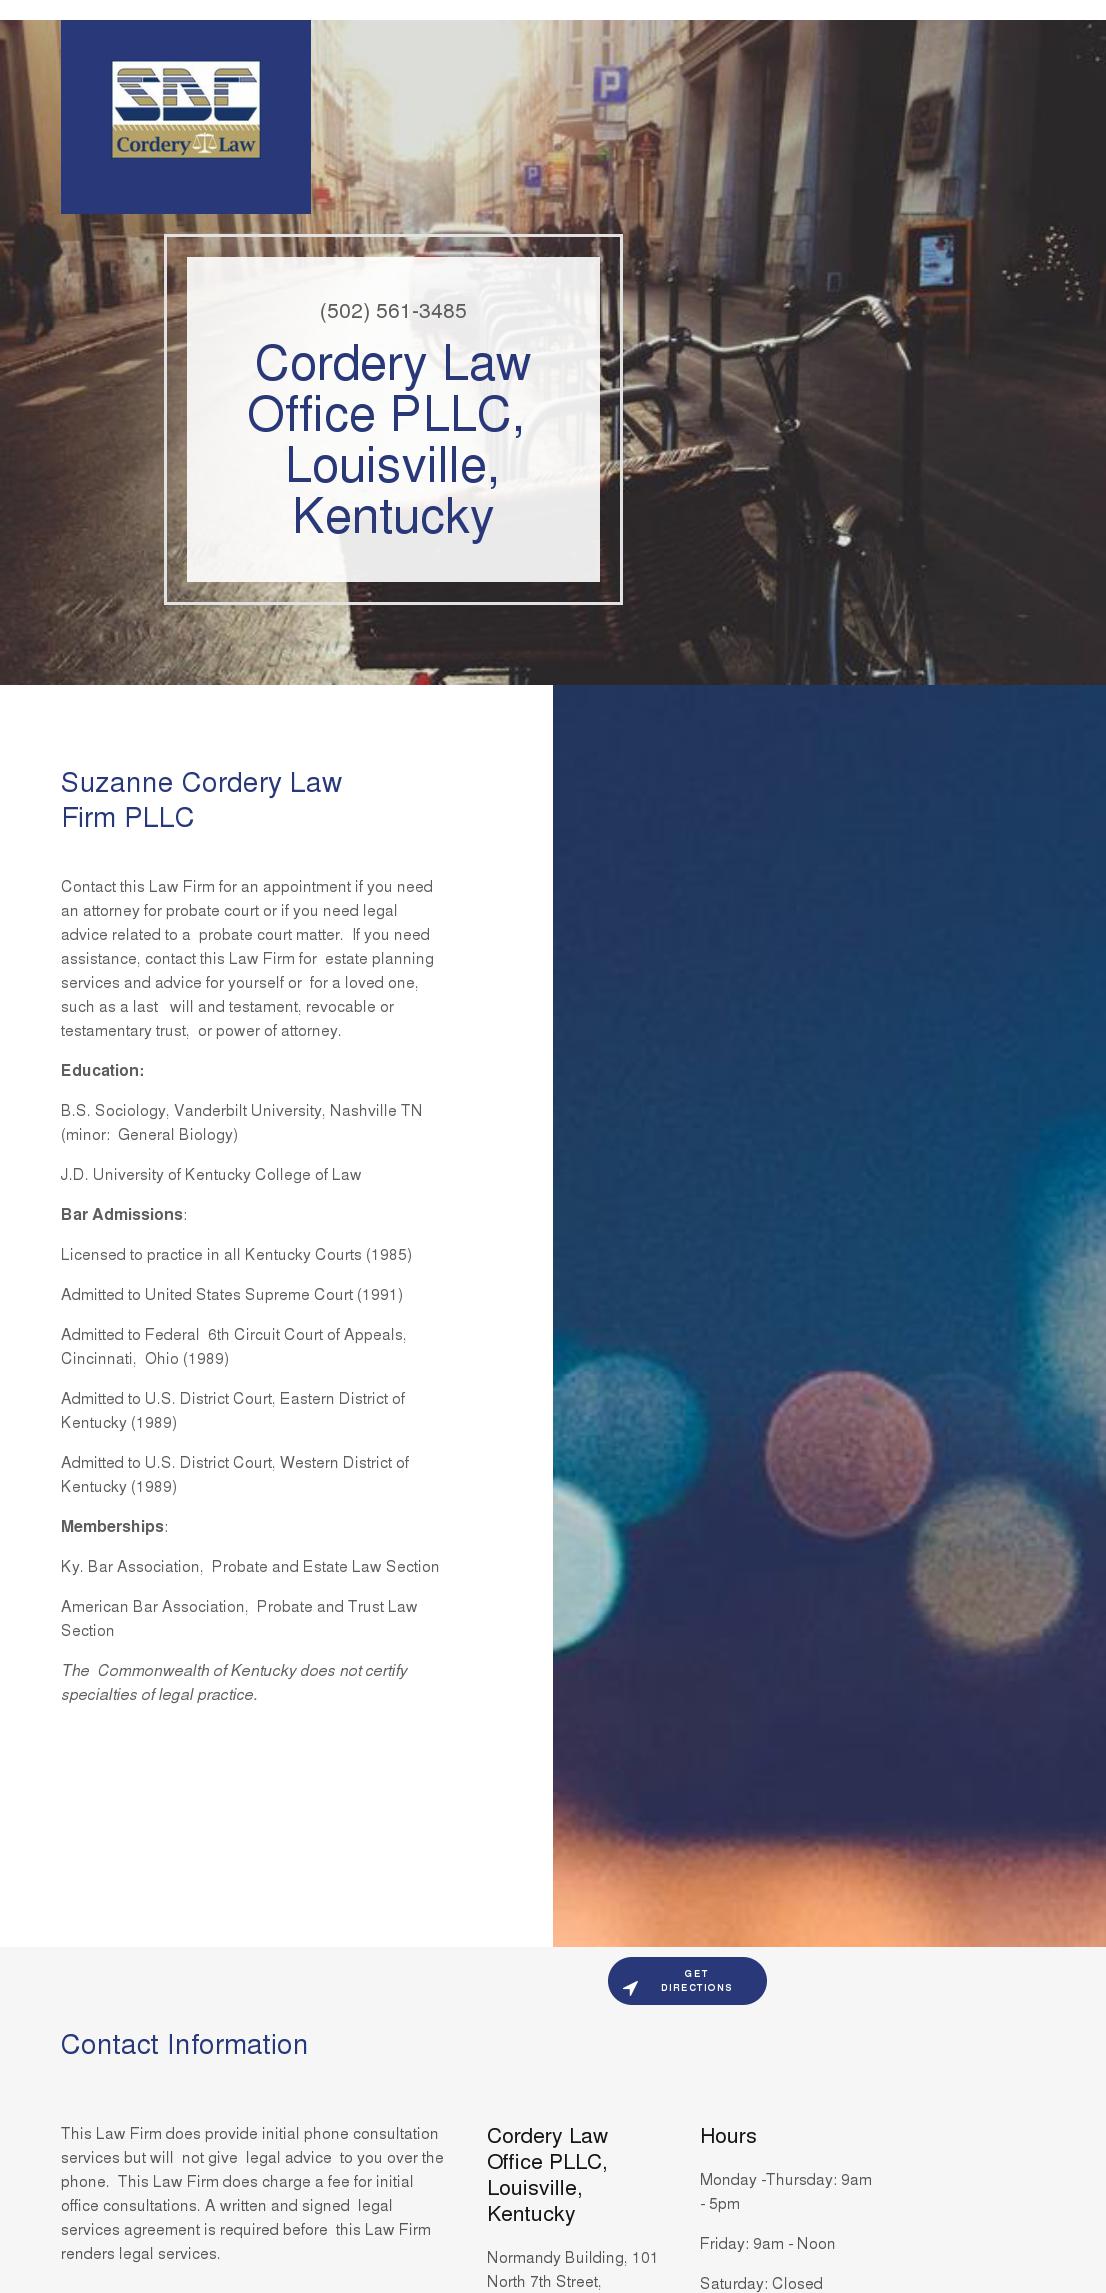 Suzanne D. Cordery Law PLLC - Louisville KY Lawyers